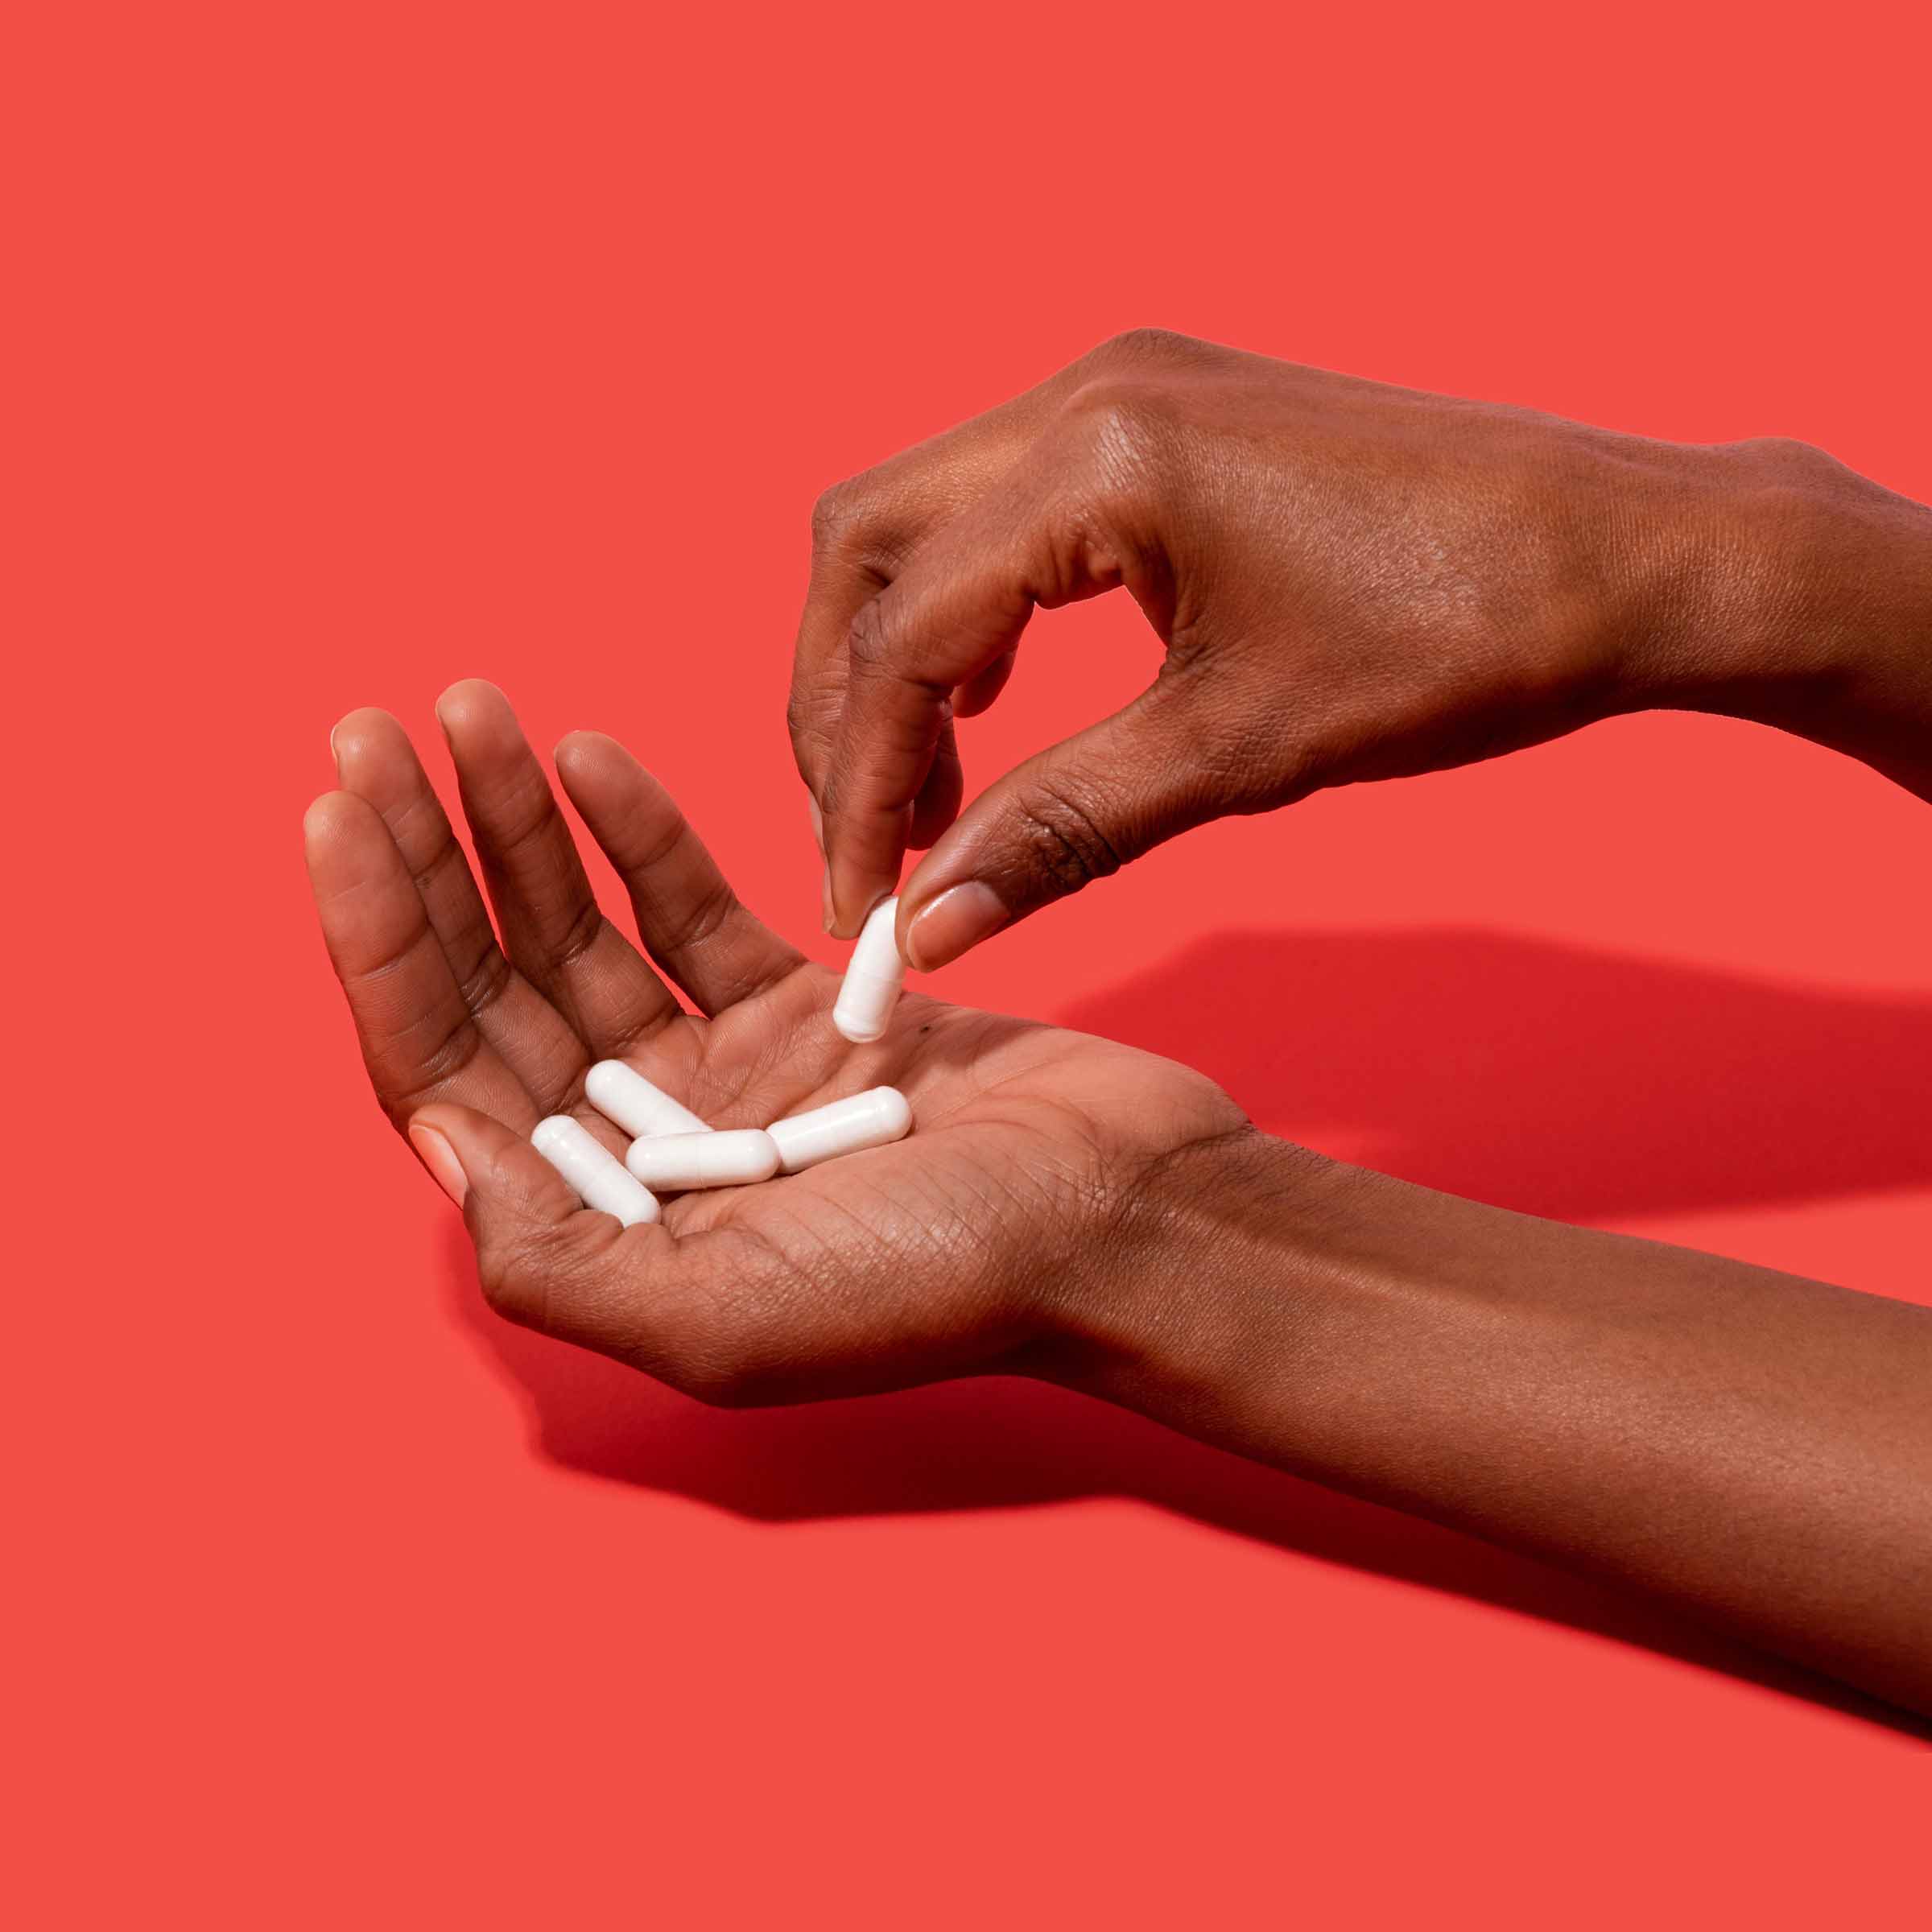 Hands holding D-Mannose capsules to prevent UTI on a red background